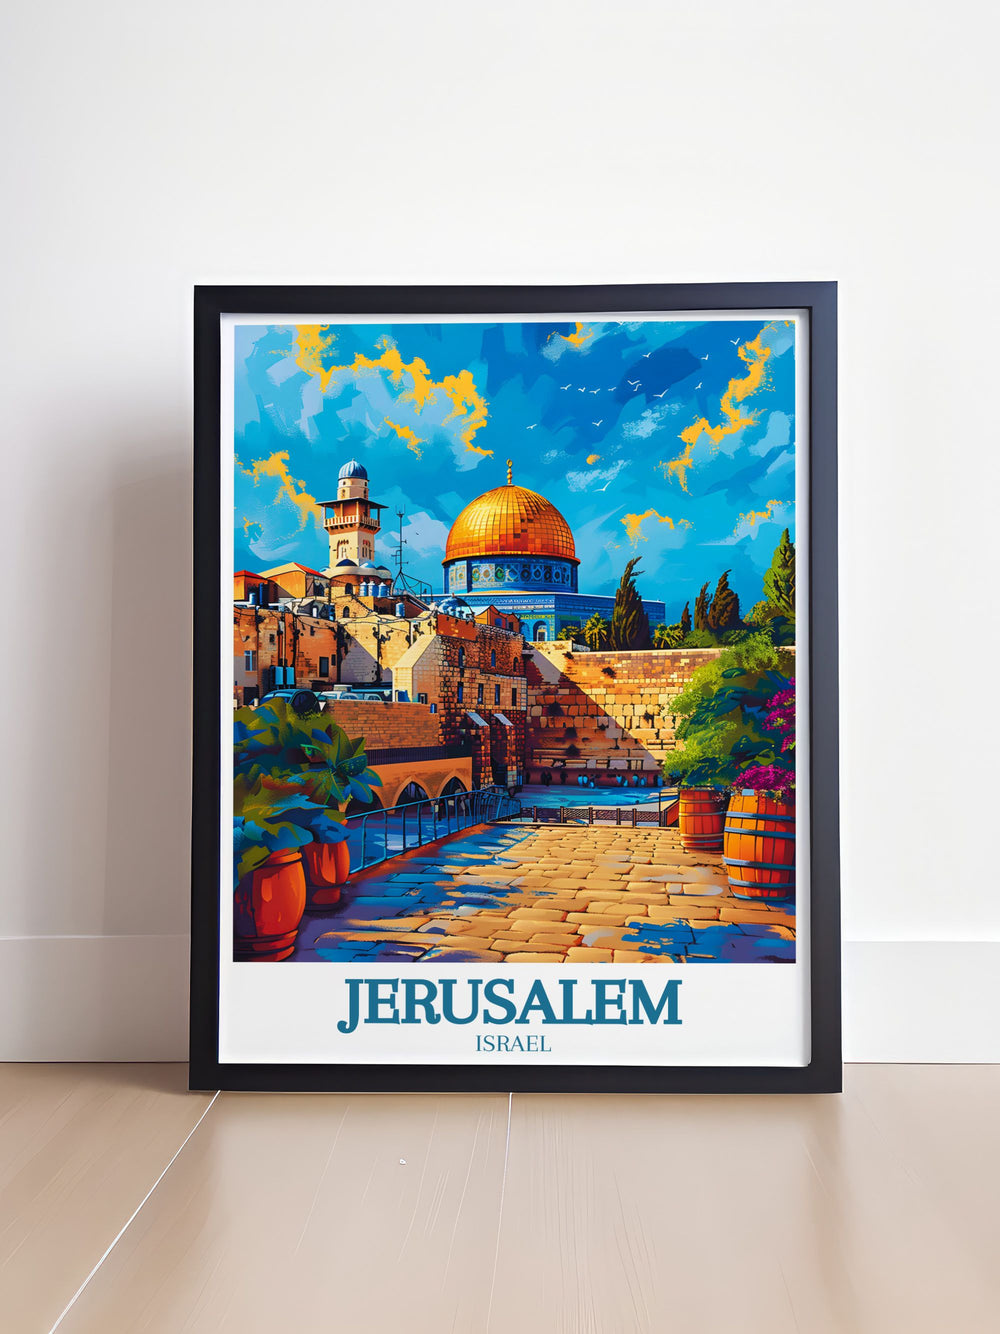 Showcasing the historical richness of Jerusalem, this travel poster features ancient landmarks and cultural sites. Ideal for history enthusiasts, this piece brings the fascinating history of the city into your home.